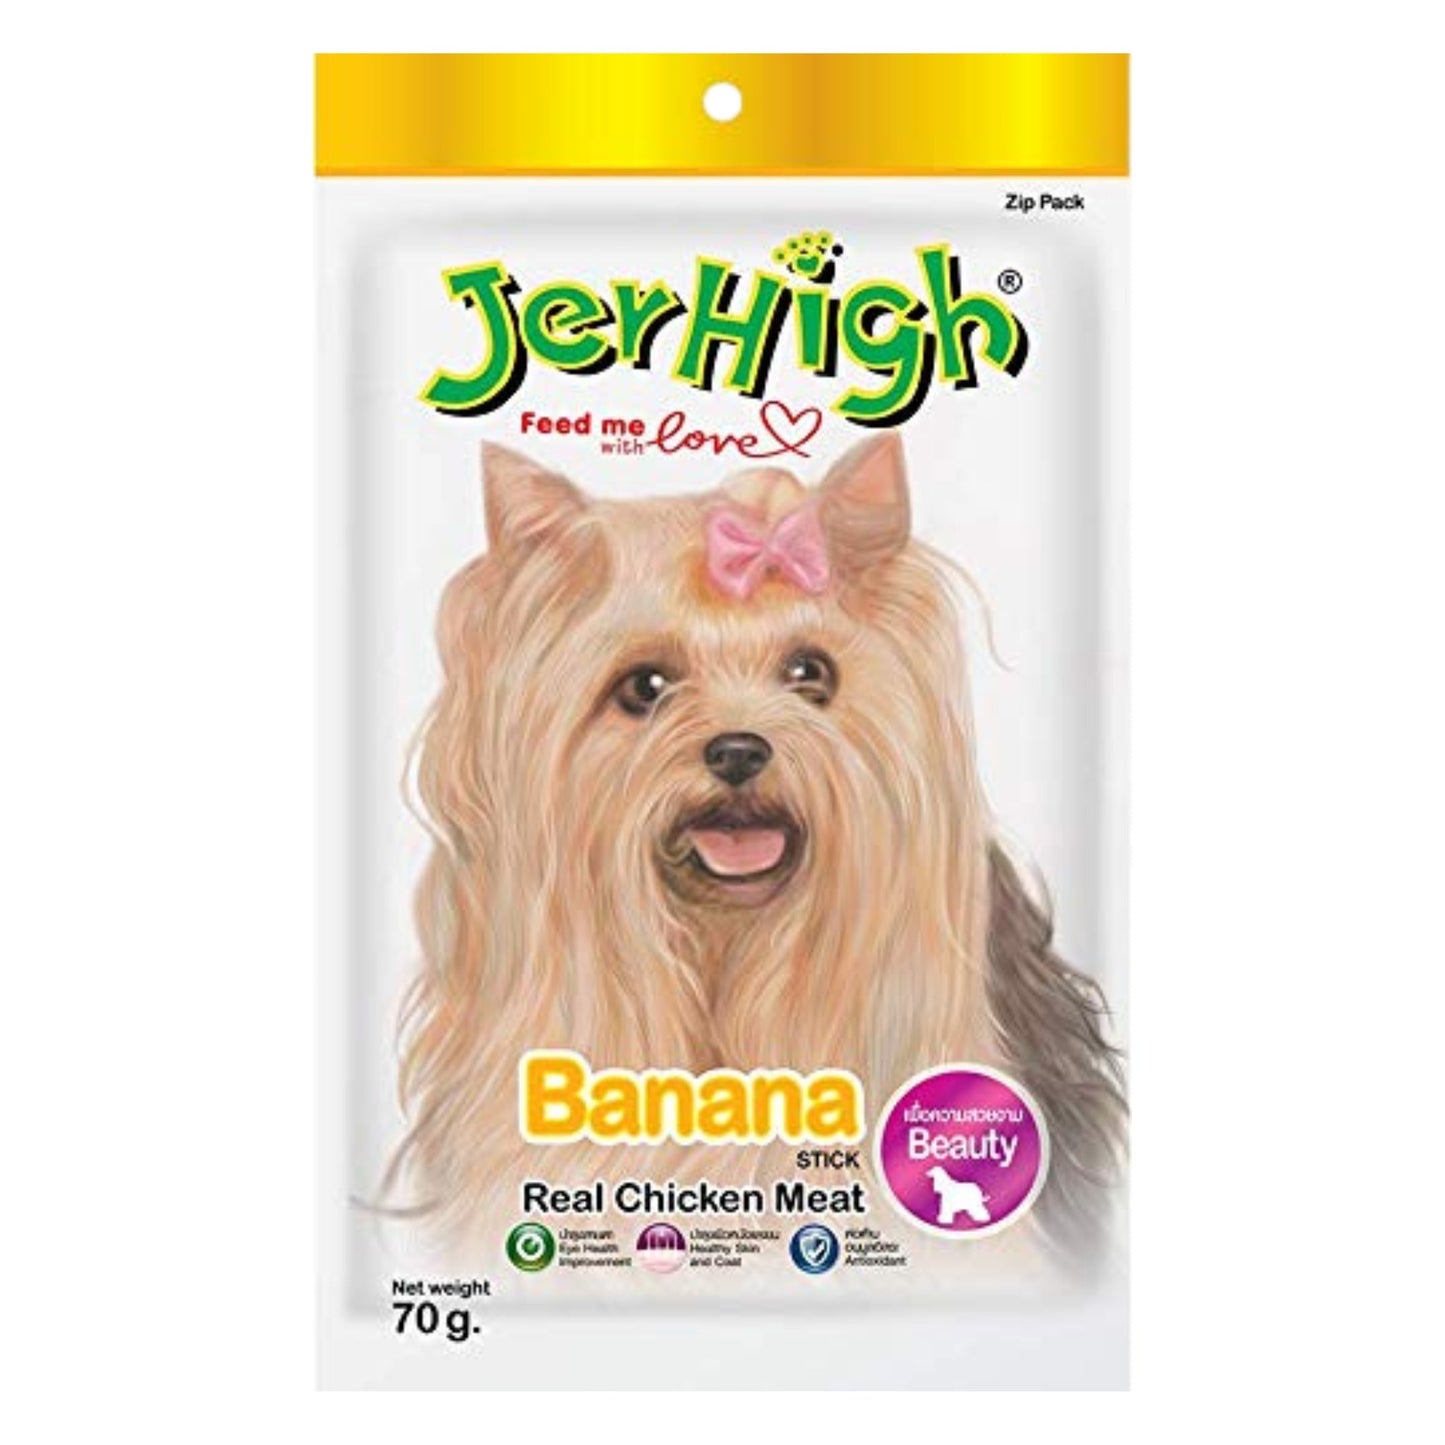 JerHigh Banana Stick Dog Treat with Real Chicken Meat - 70g, Pack of 2